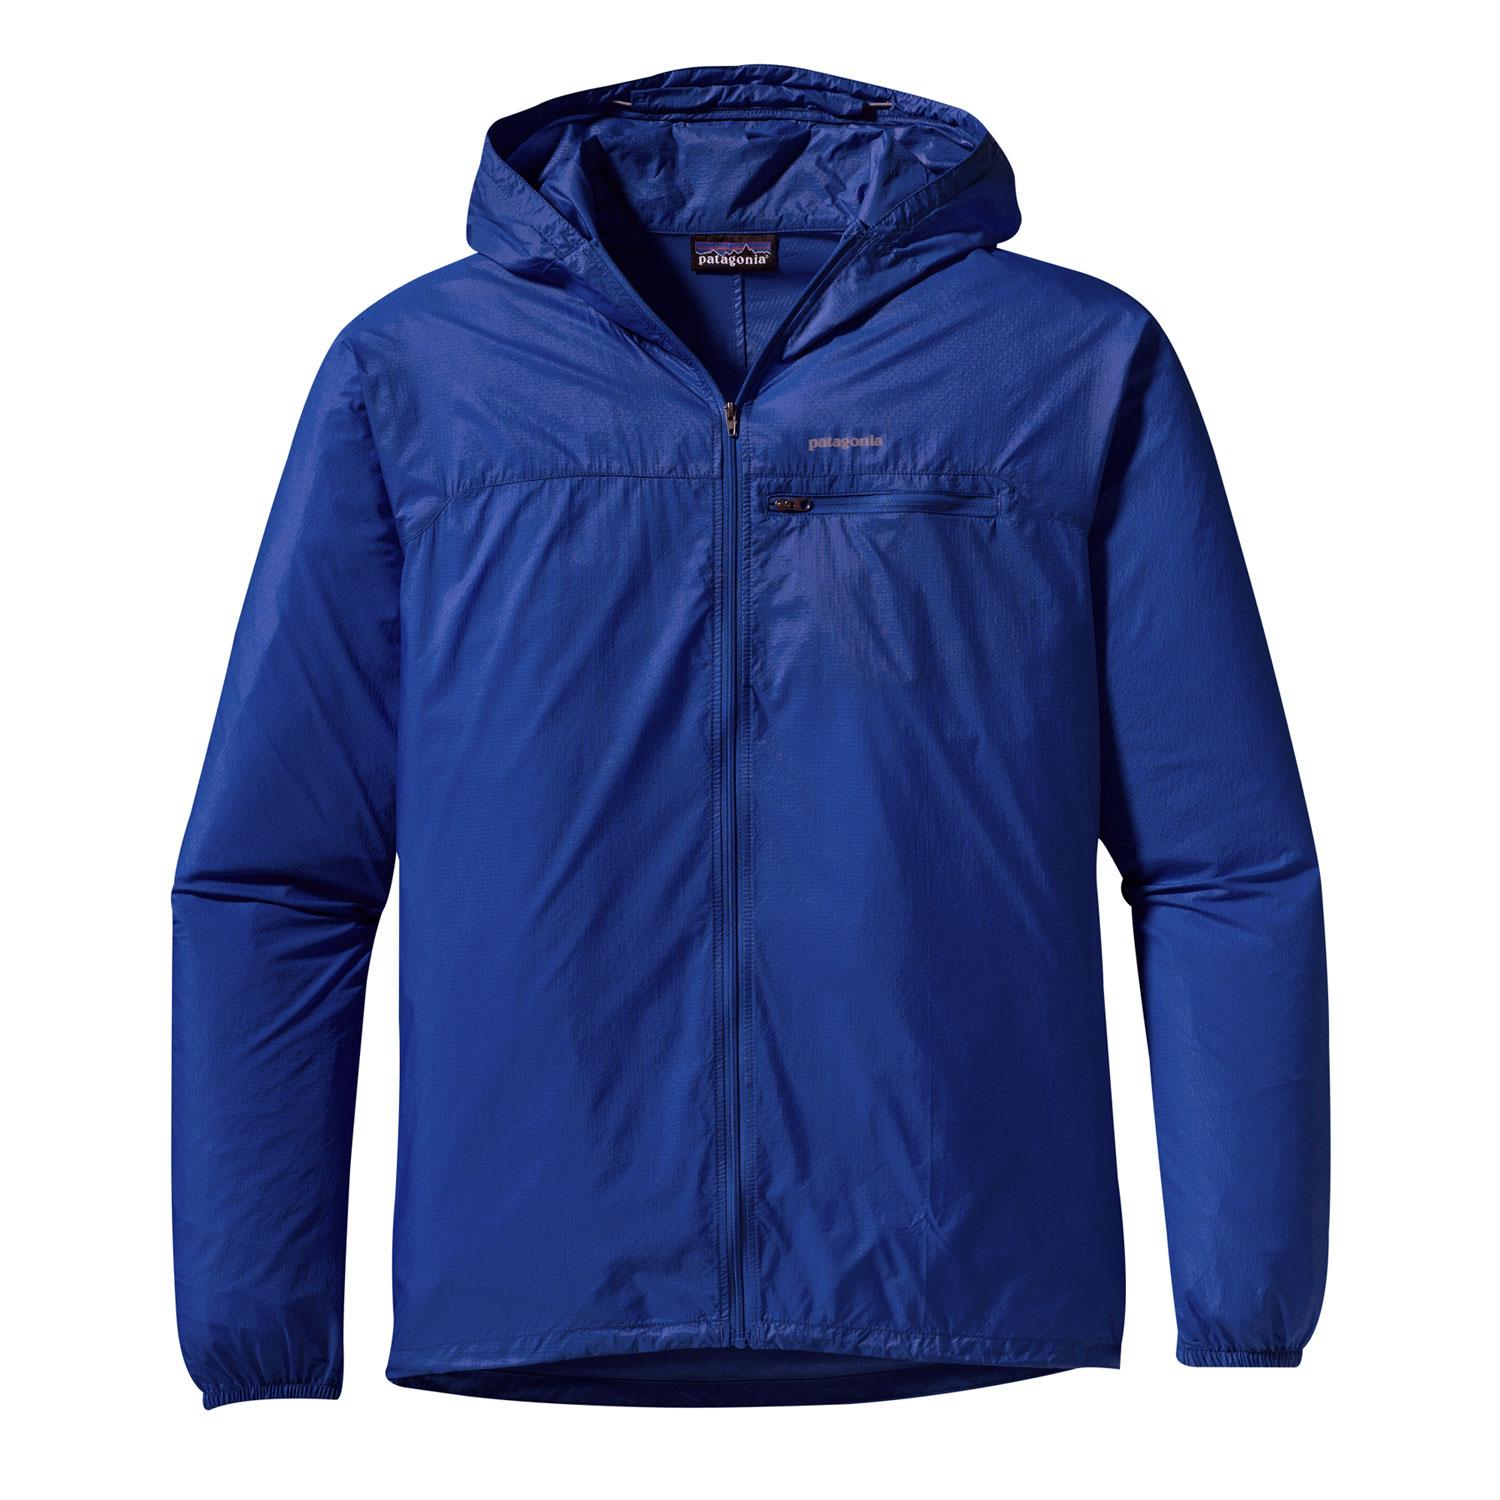 Gear – Wind Jacket Review: Houdini vs. Sirocco